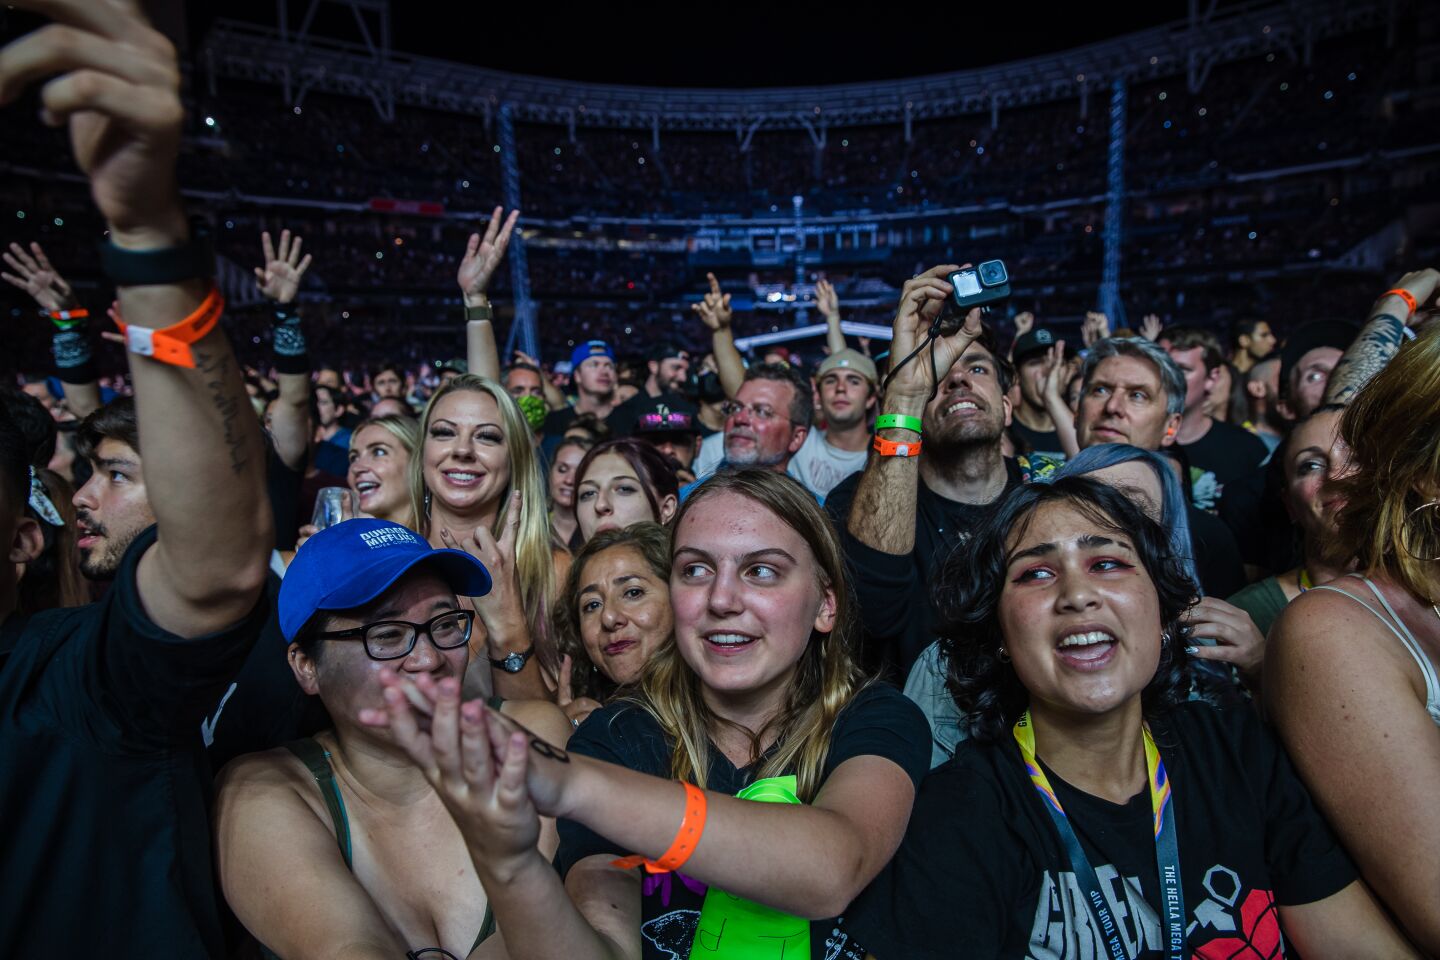 The crowd during the Hella Mega Tour at Petco Park in downtown San Diego on August 29, 2021.